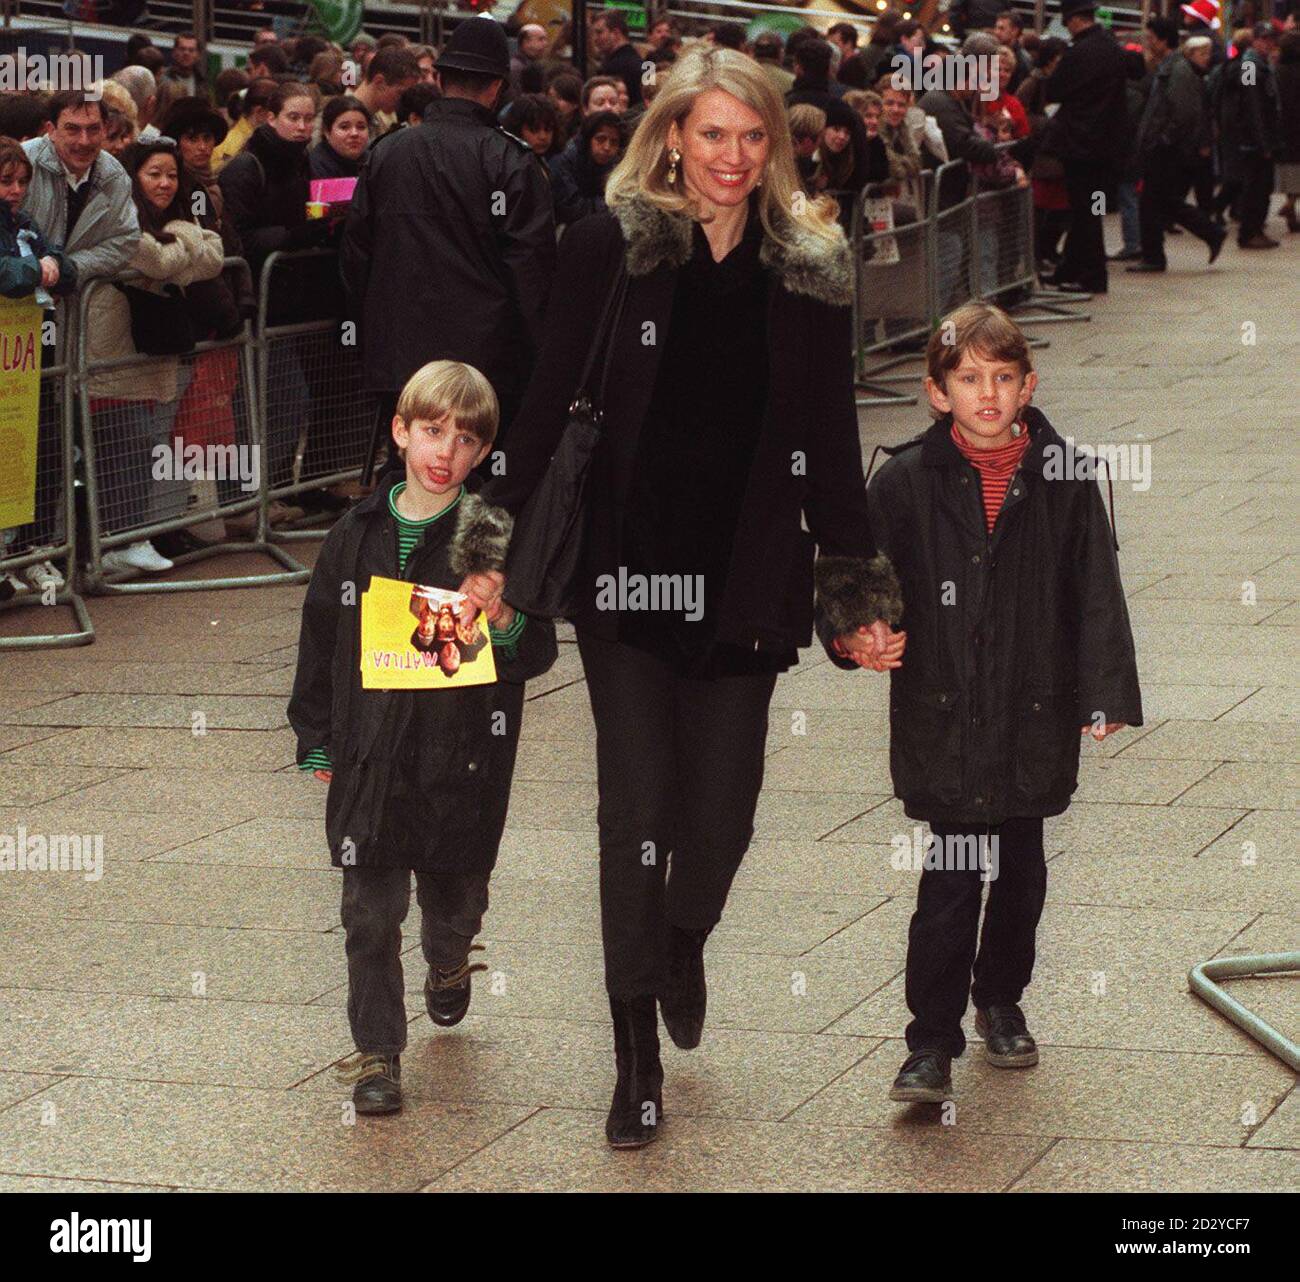 PA NEWS PHOTO 15/12/96  ANNEKA RICE WITH HER SONS THOMAS AND JOSHUA ARRIVE FOR THE MOVIE PREMIERE OF 'MATILDA' Stock Photo